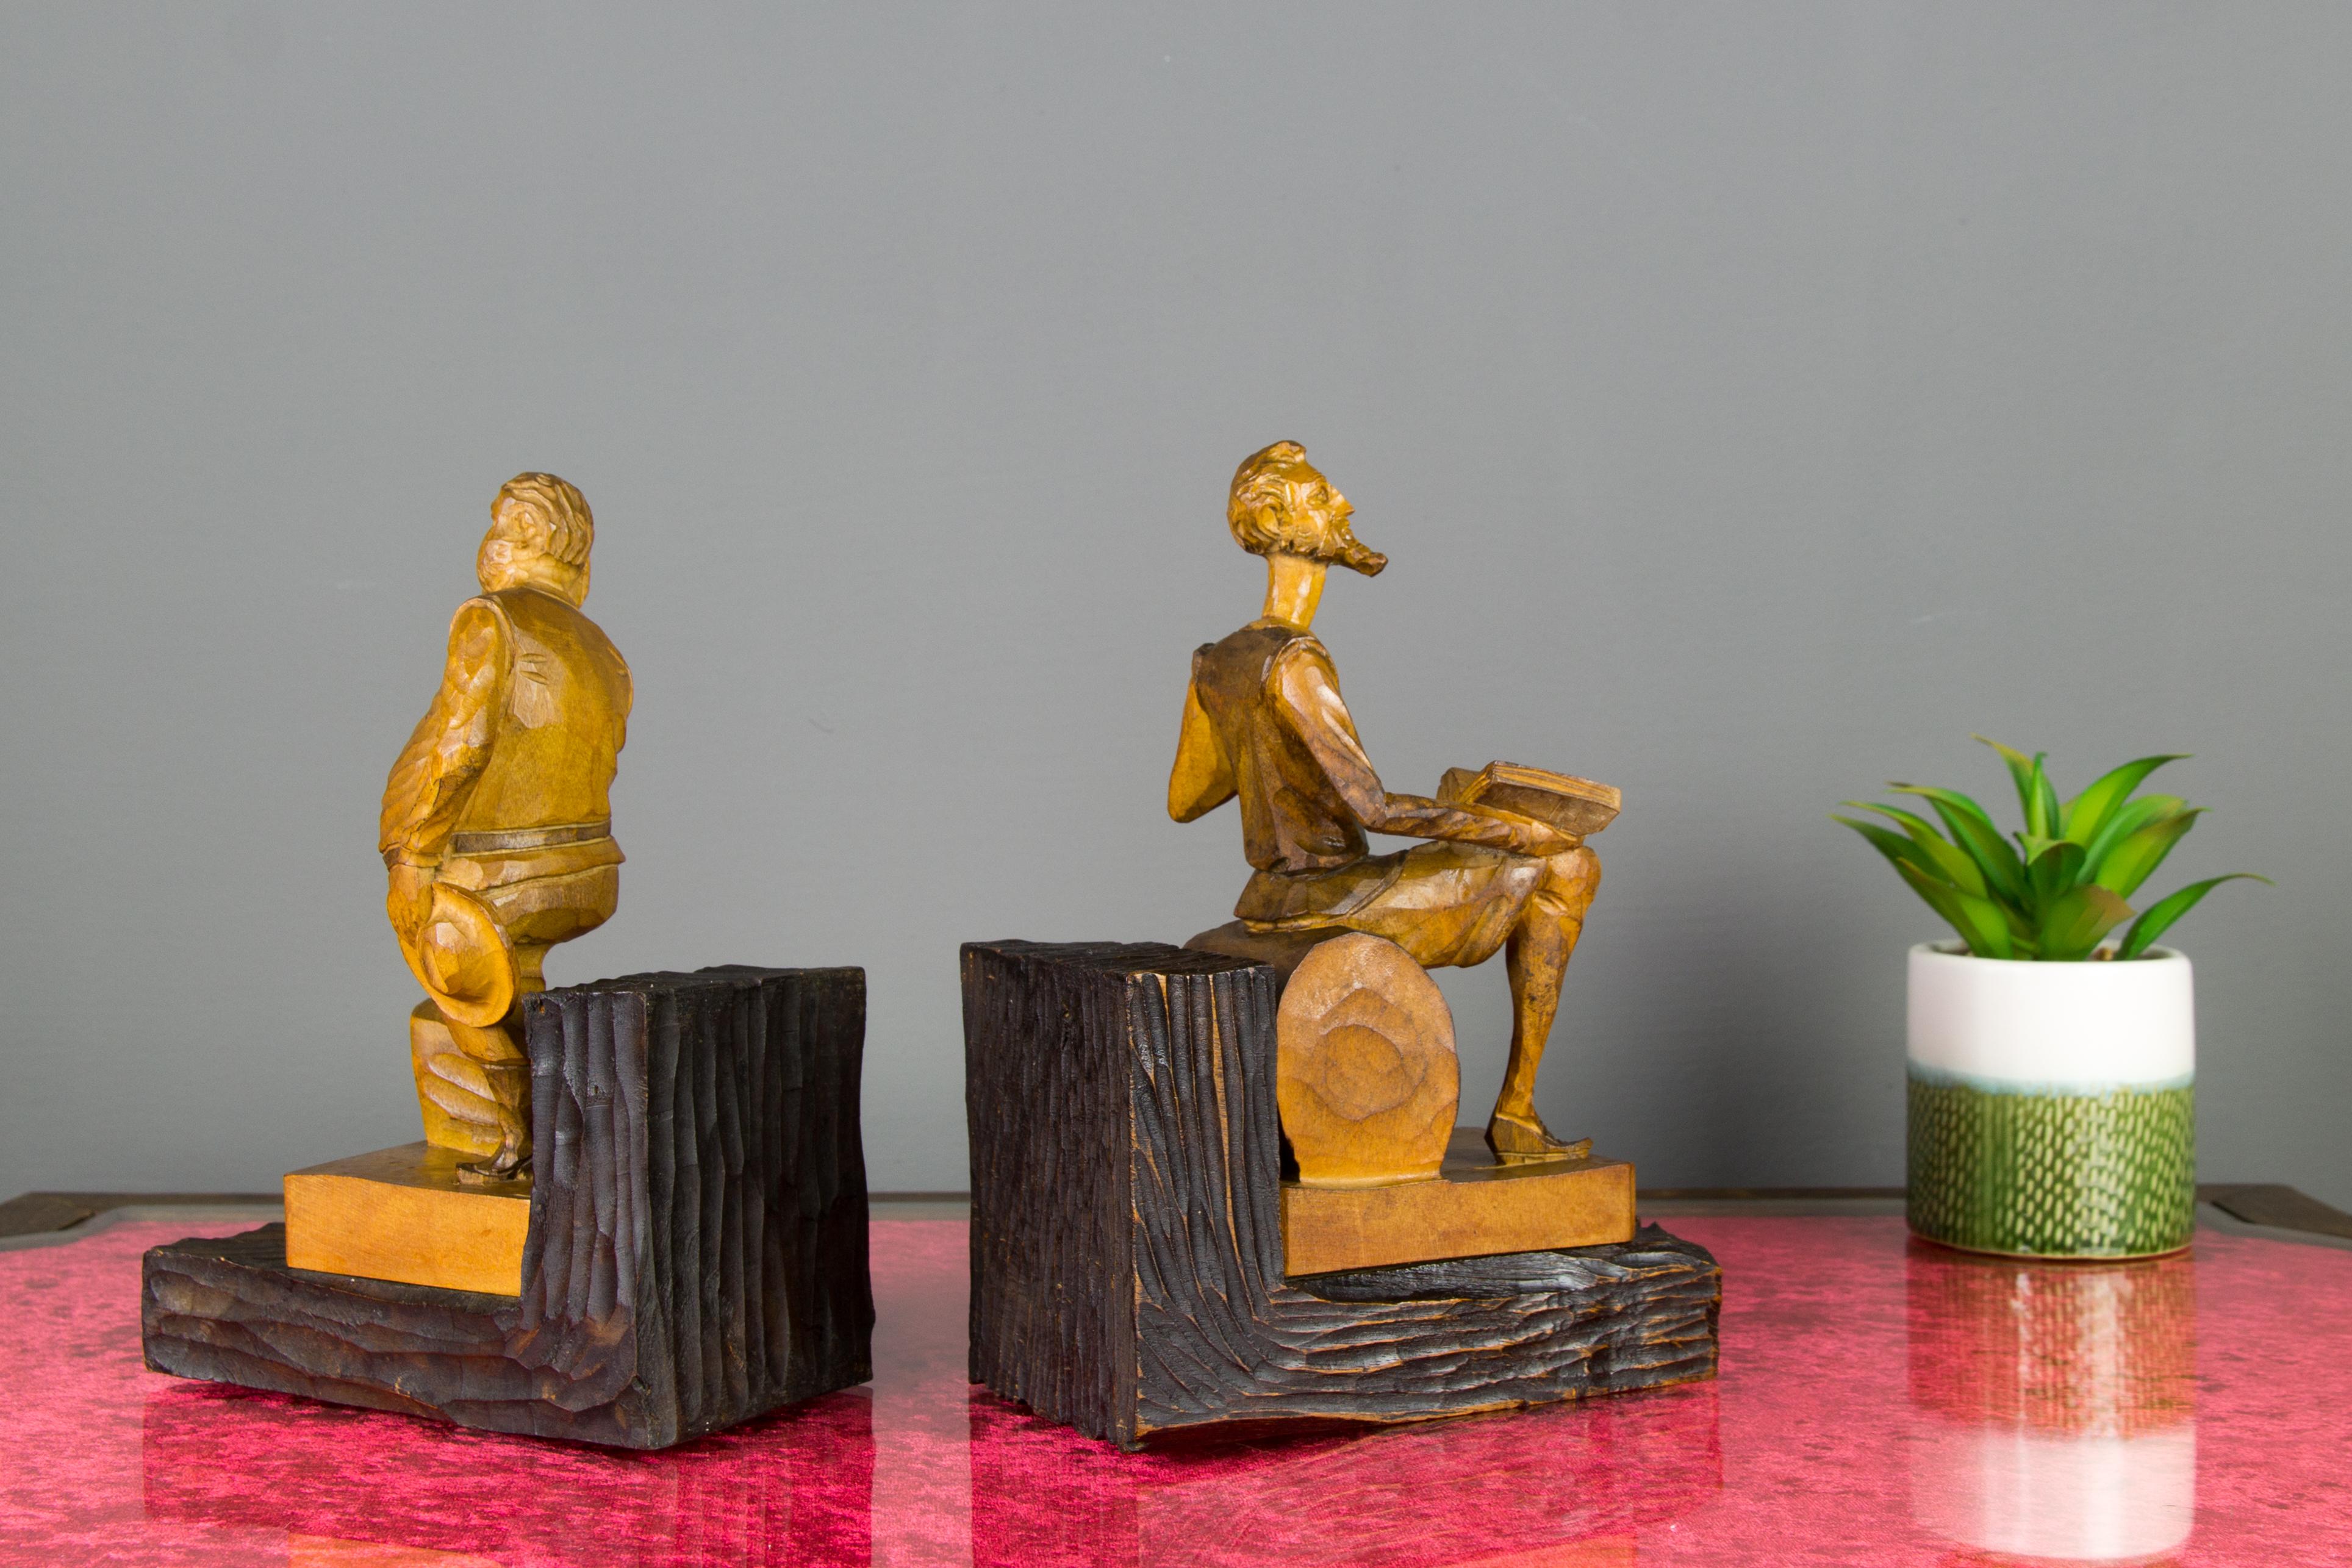 Mid-20th Century Hand Carved Wooden Don Quixote and Sancho Panza Sculpture Bookends For Sale